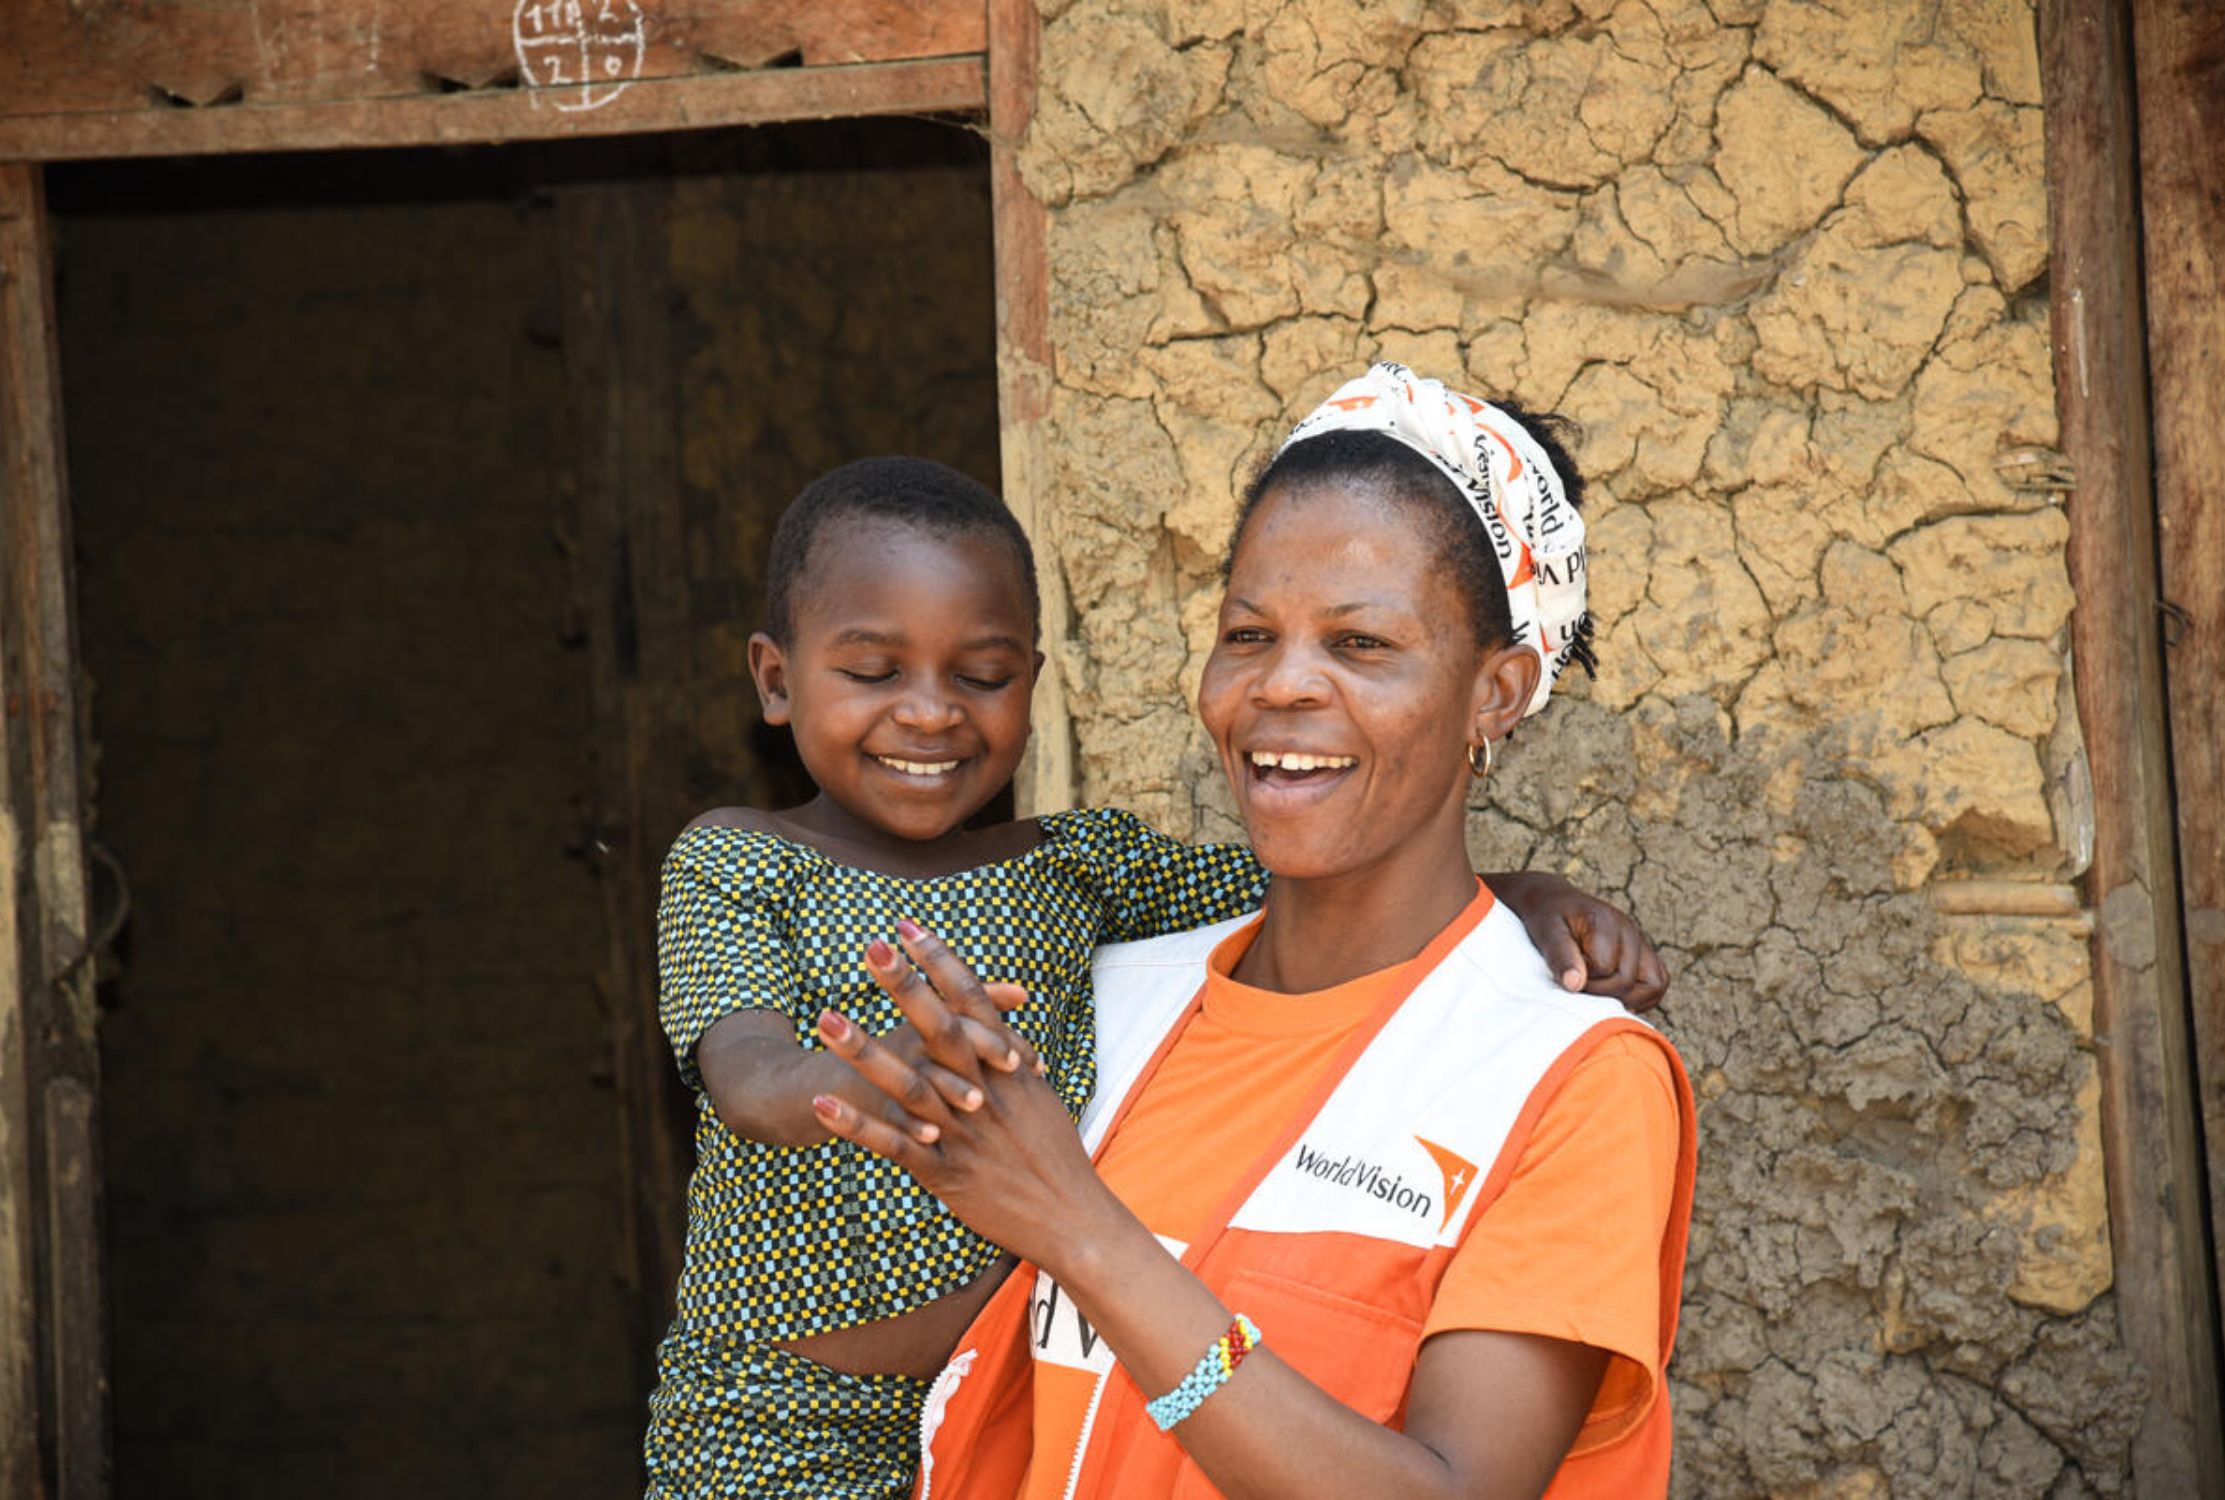 A member of the World Vision's team in DRC holding a young girl, both smiling